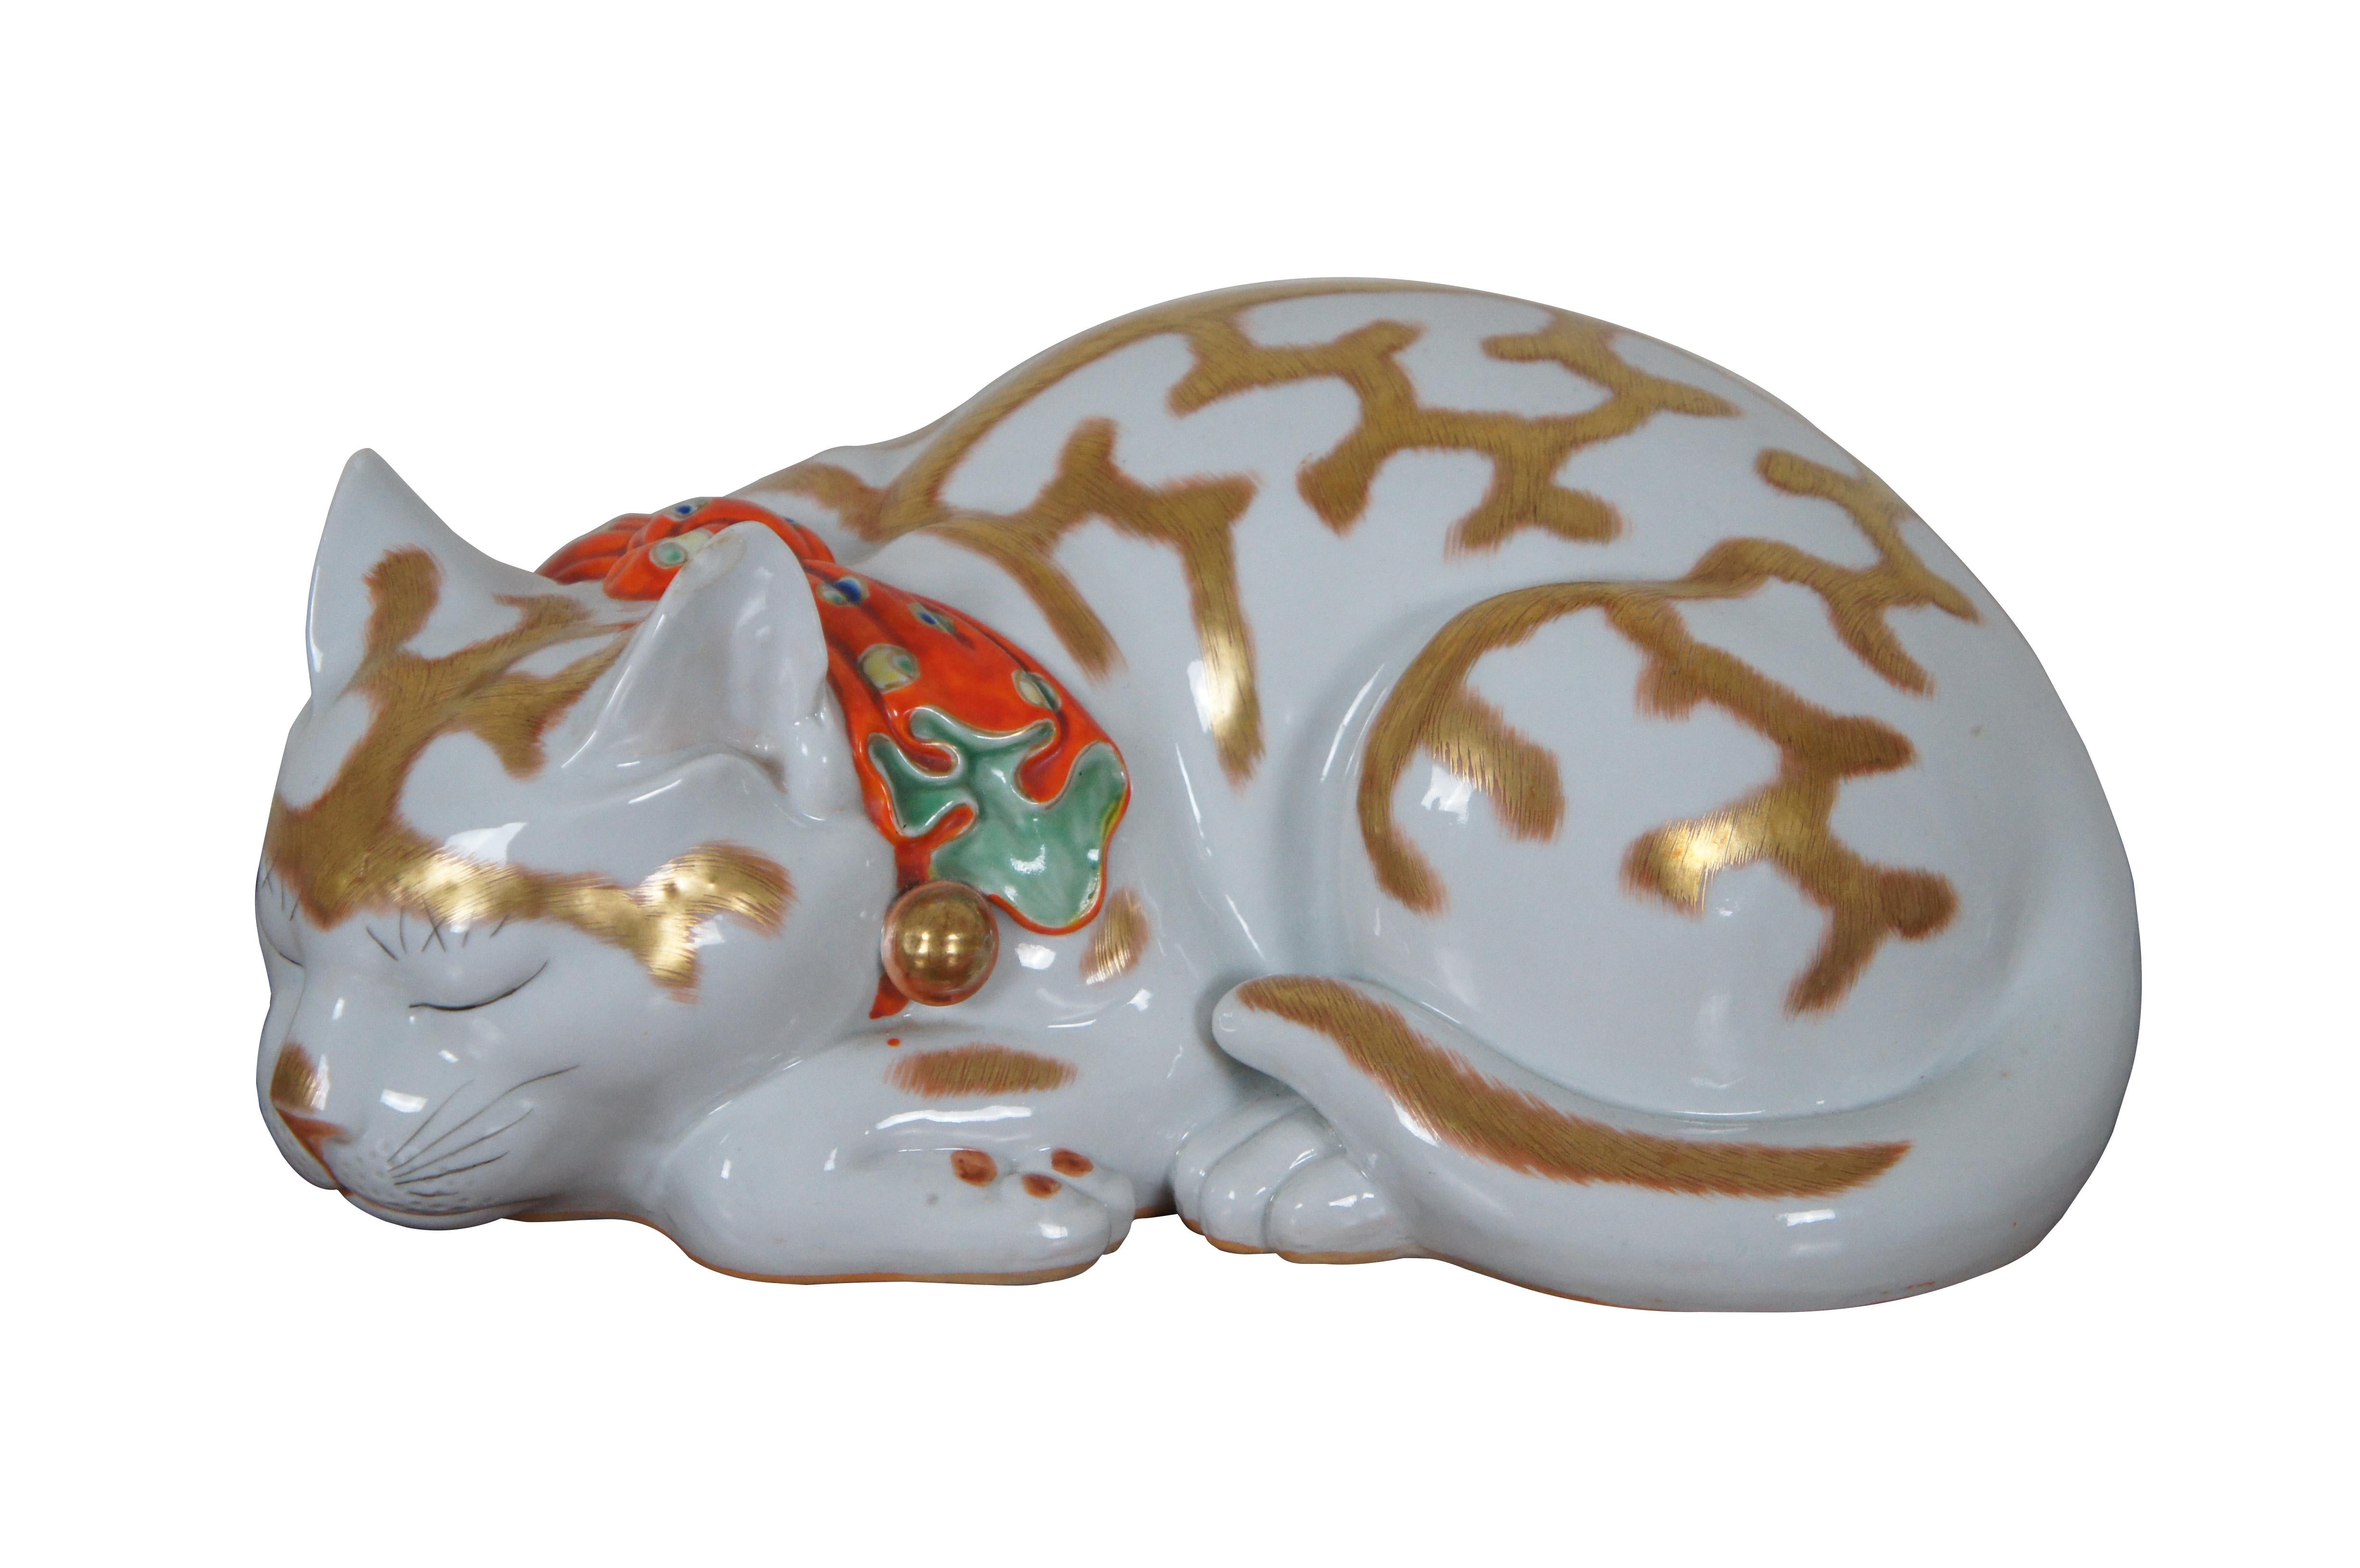 Antique porcelain Imari sleeping cat and kitten figurines featuring gold accents and red bandana with bells.

Dimensions:
Cat - 12” x 8.5” x 5.5” / Kitten - 7” x 5” x 3.25” (Width x Depth x Height)